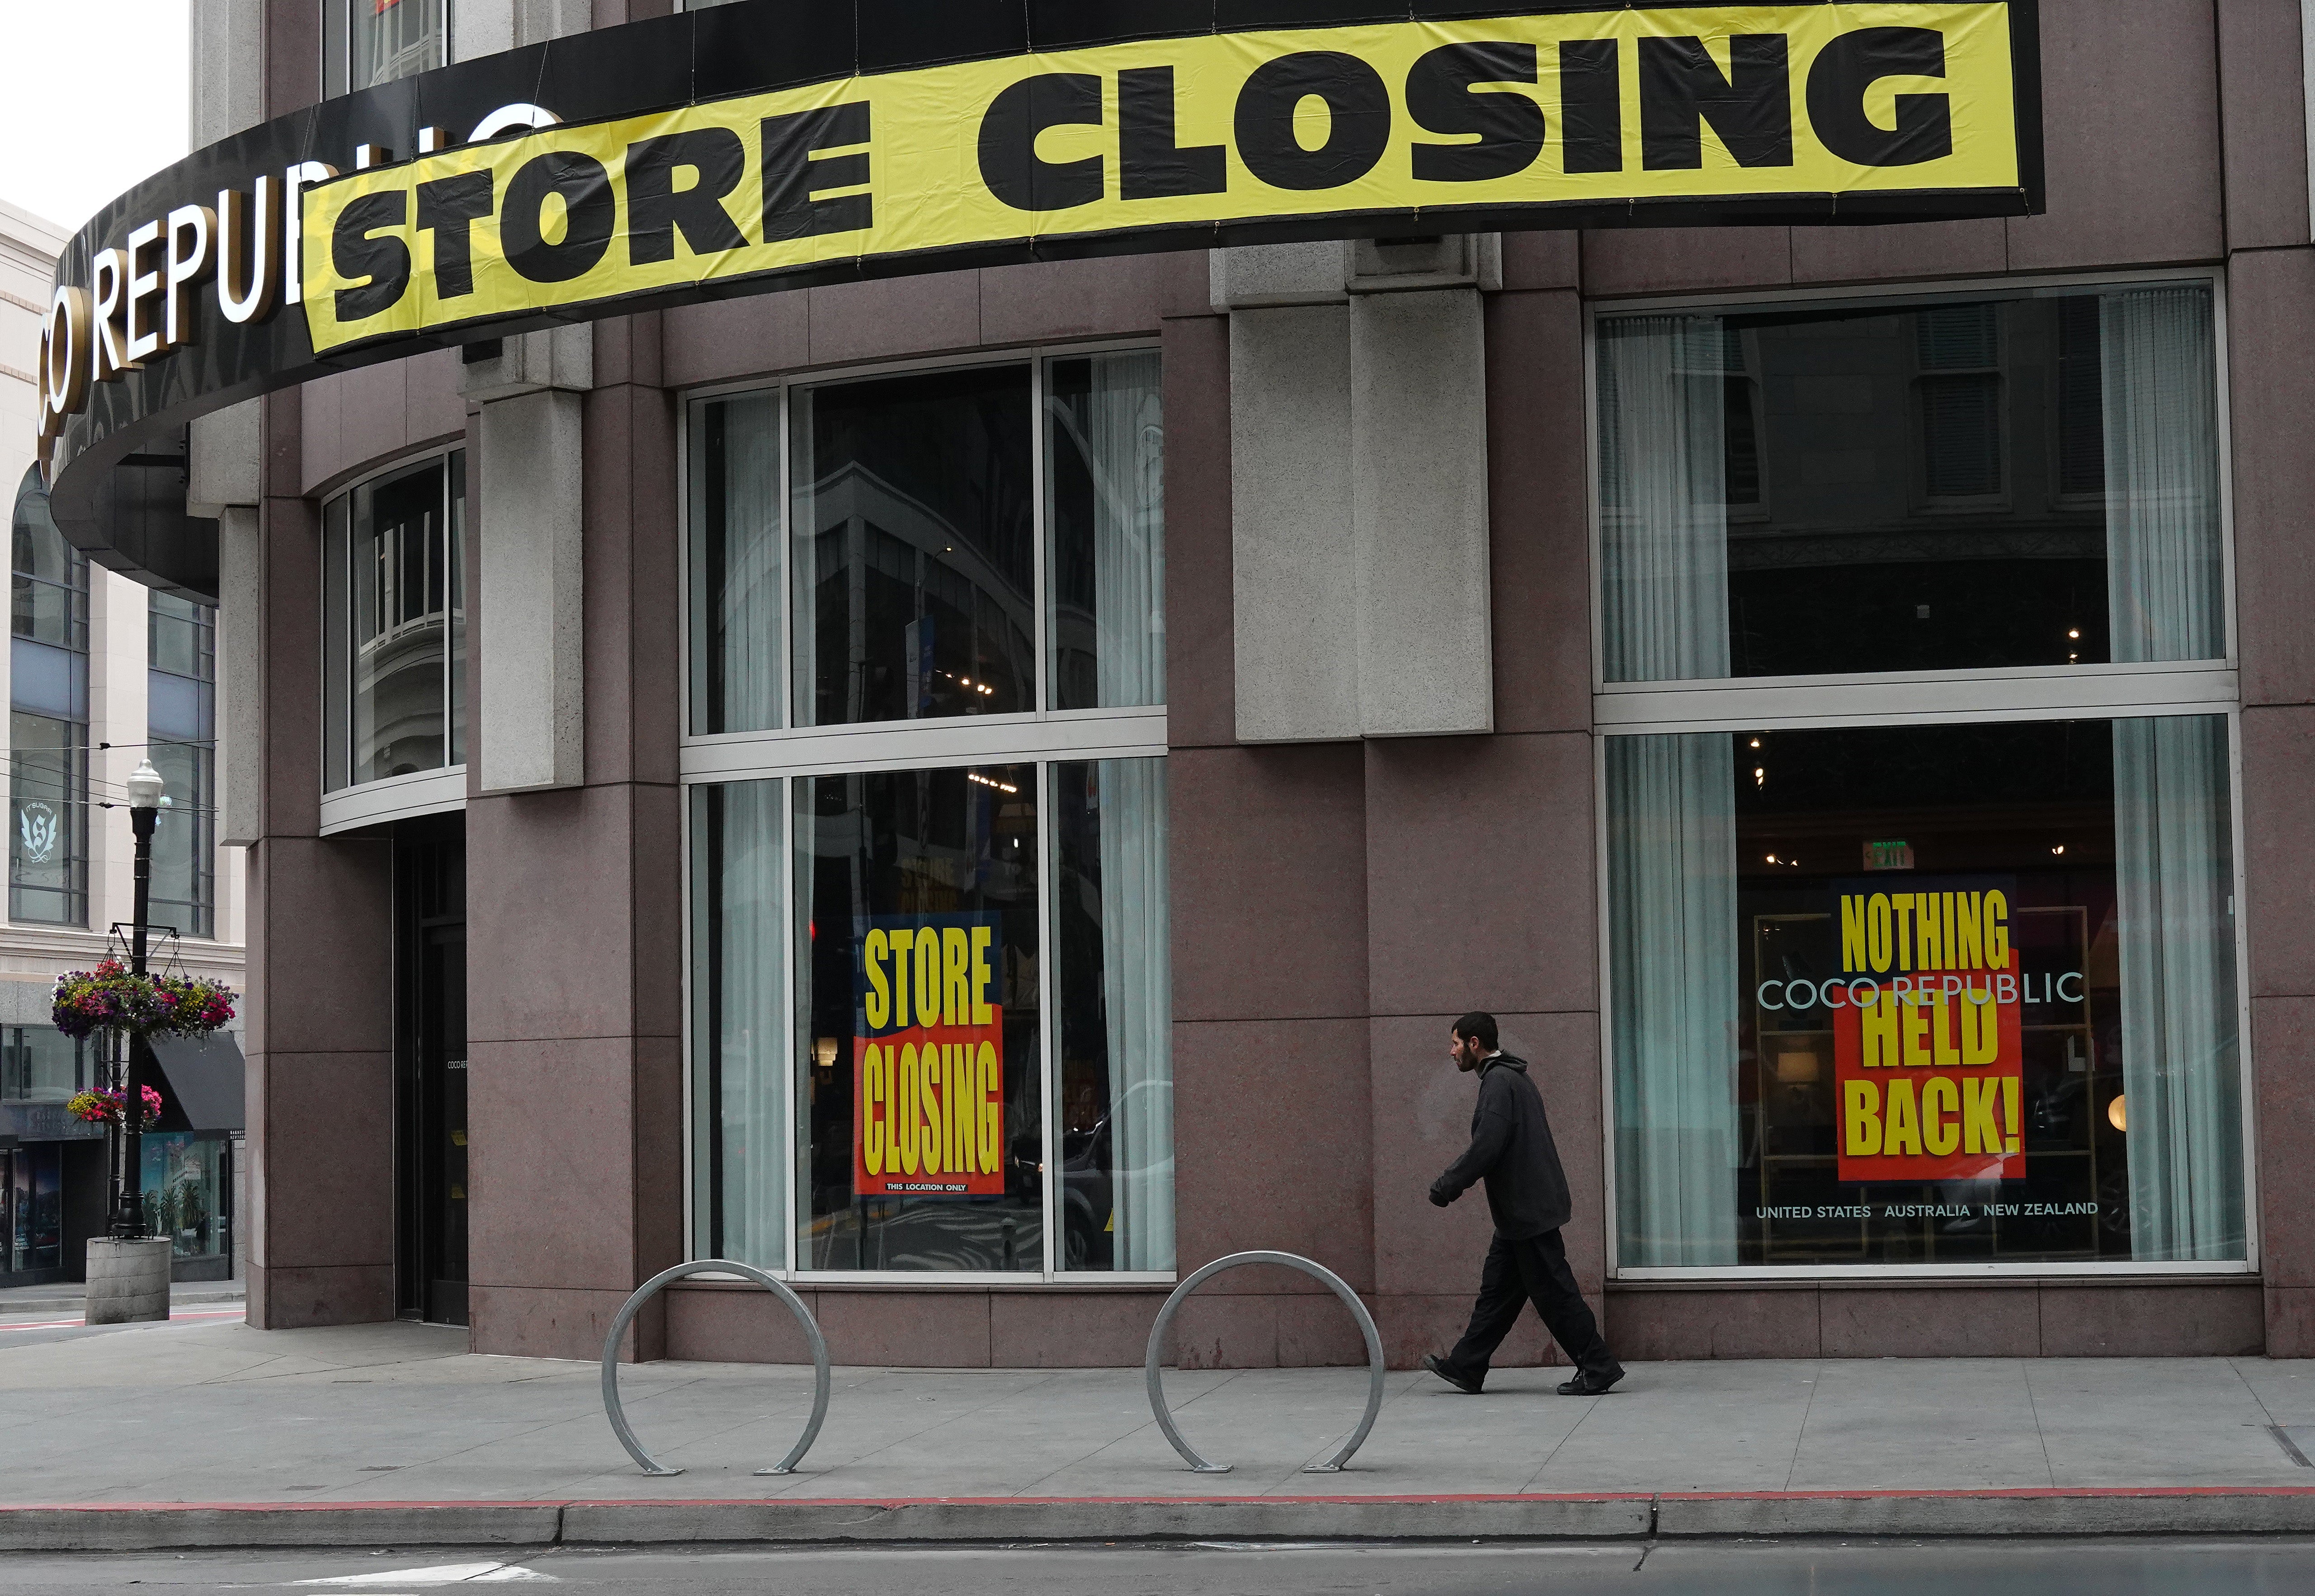 San Francisco’s downtown continues to struggle with keeping retail and commercial properties rented following the Covid-19 pandemic, and lags behind all major cities in the US